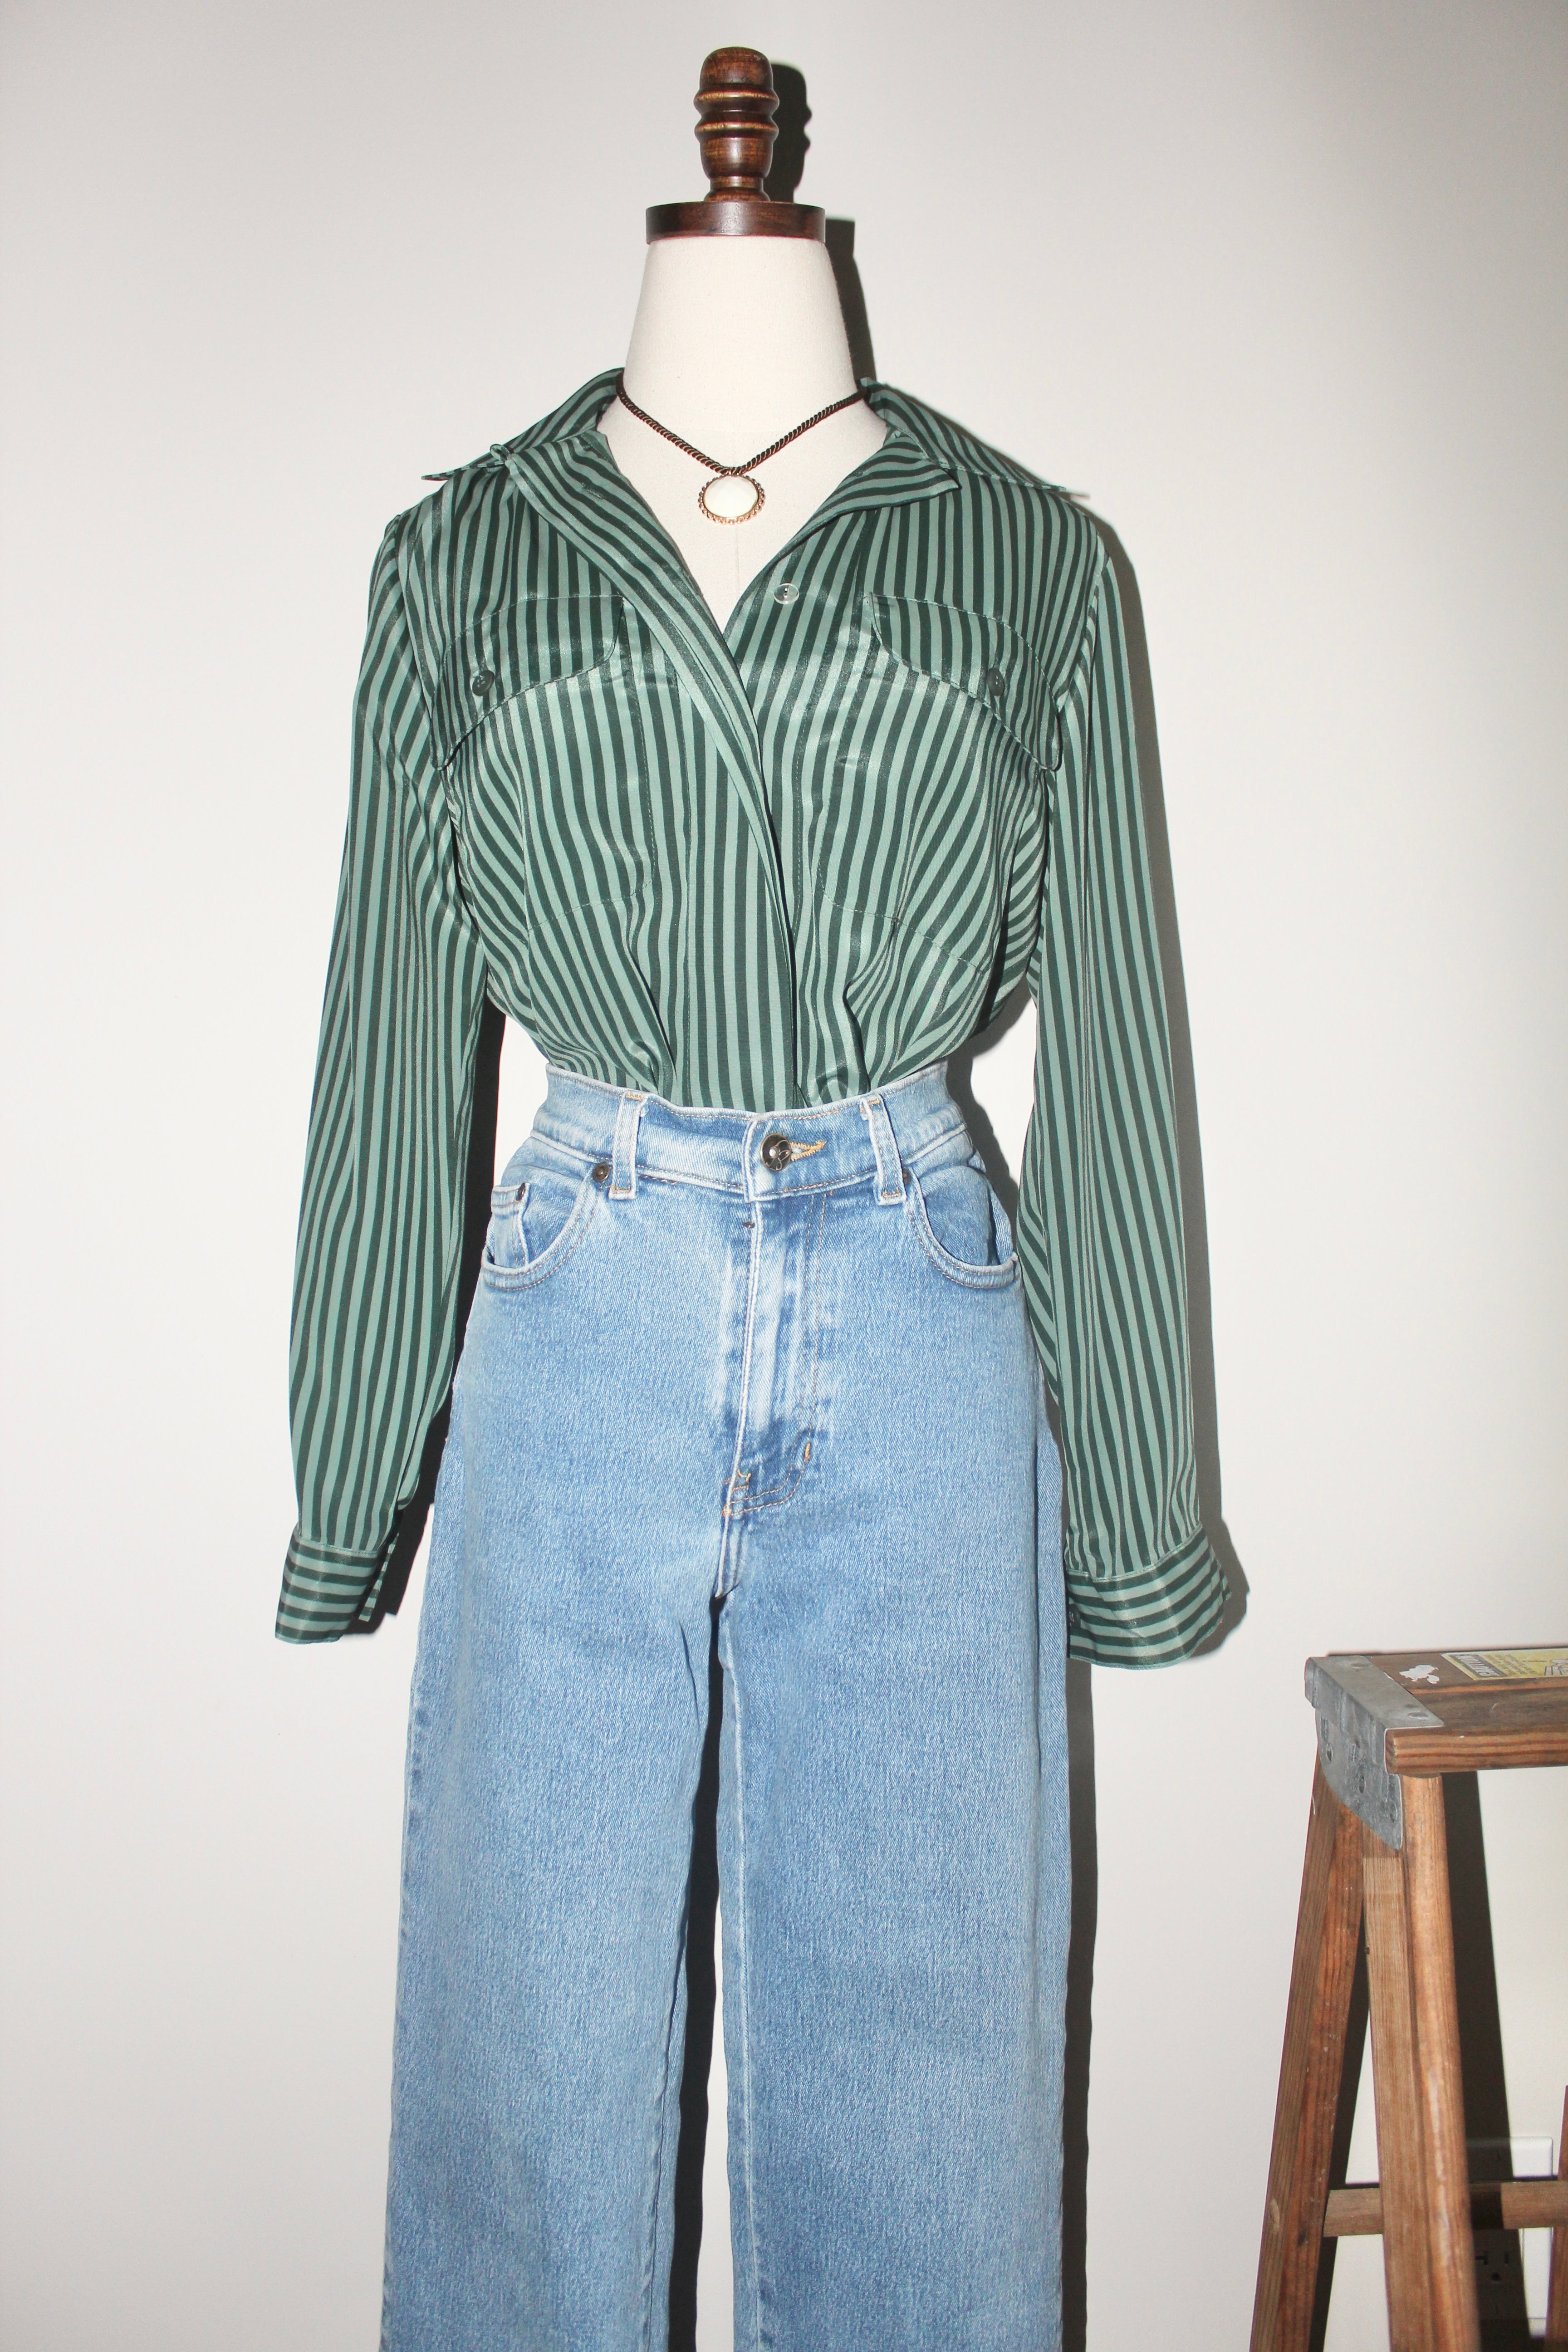 Vintage 90s Green Striped Button Up (M)